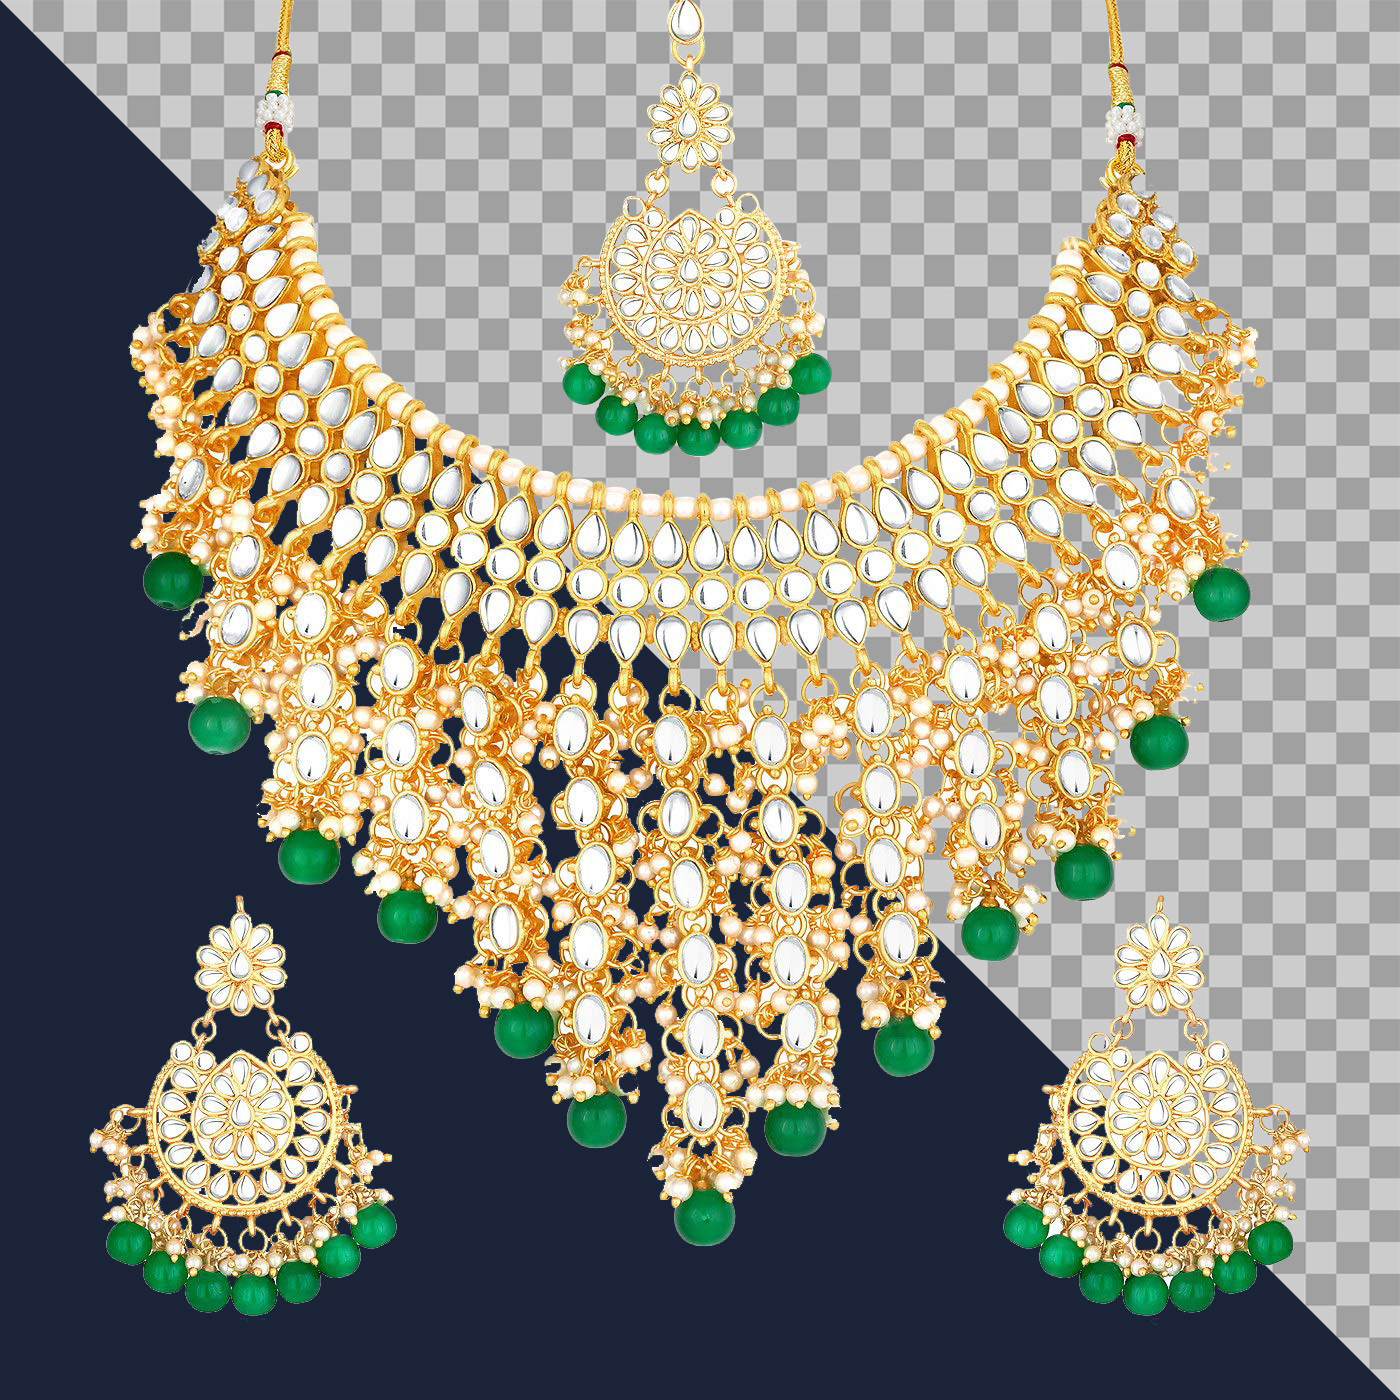 Clipping path Background Remove Photo Retouching Background removal bg remove transparent background cut out image Image separation Jewellery Clipping path